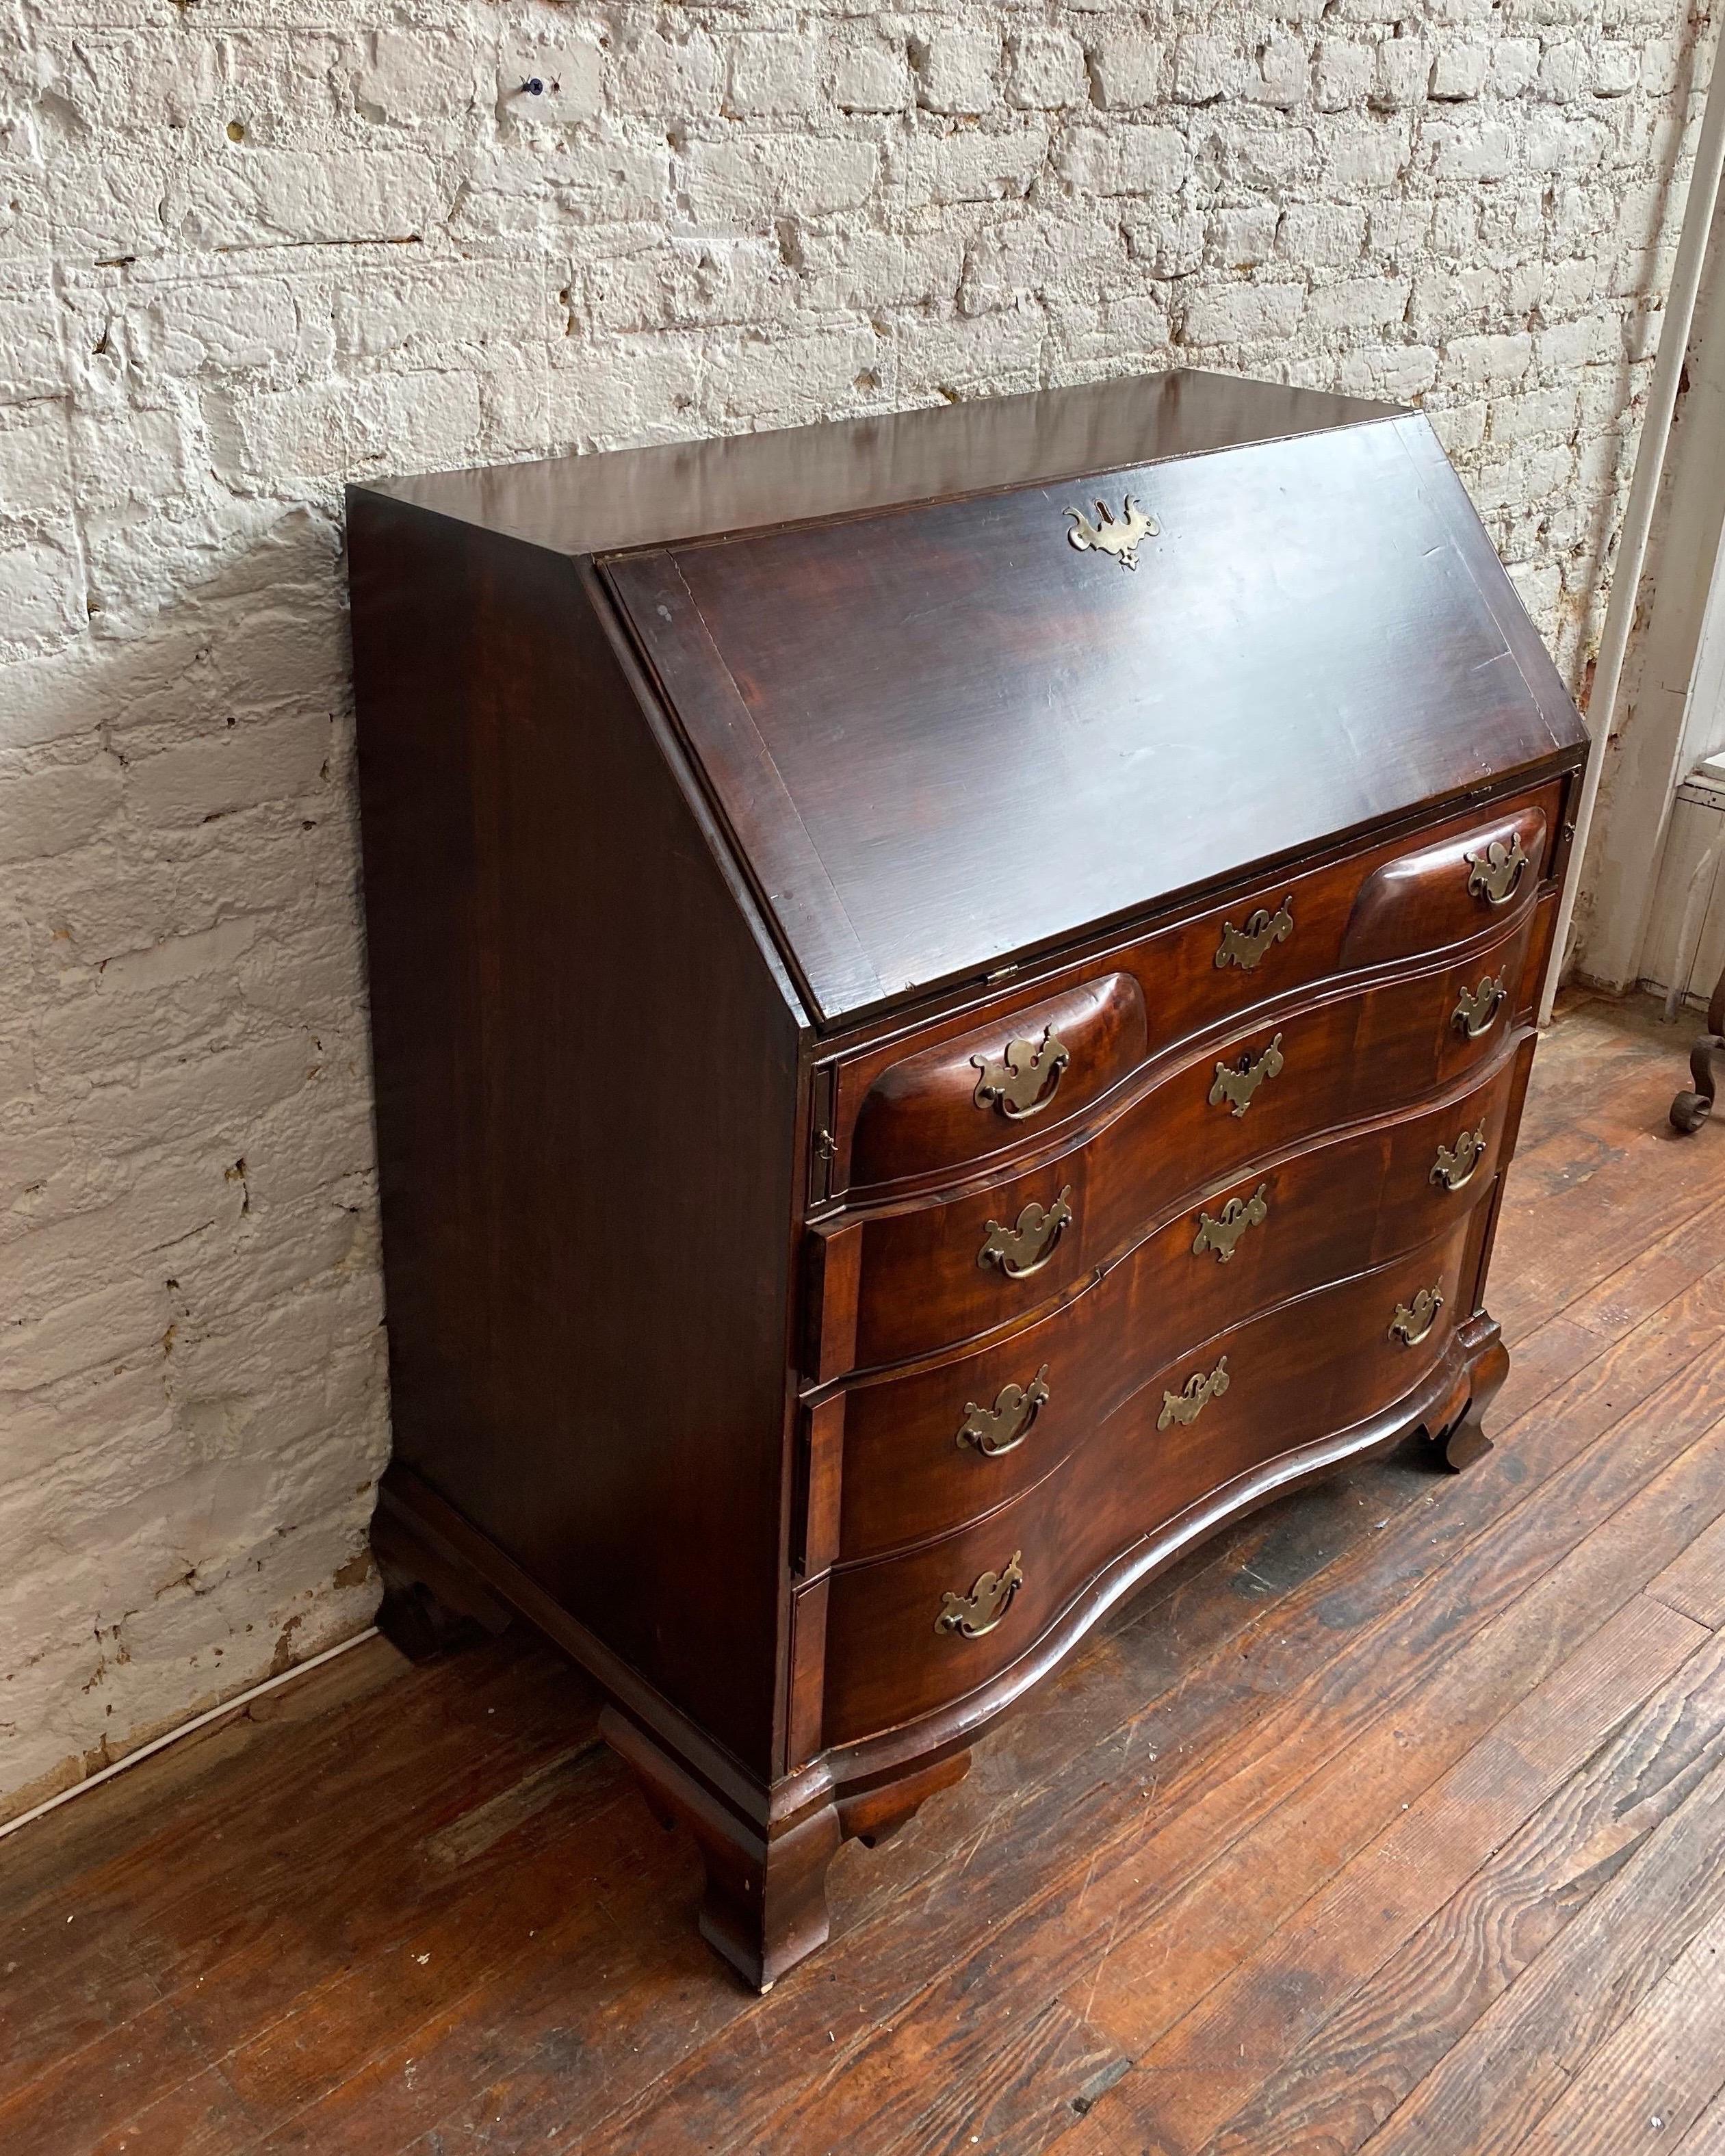 Early 19th century American mahogany slant front desk. Probably Boston, has the blockfront shape that is typical to that area. Nice quality mahogany, exposed dovetails on top and ogee bracket feet.